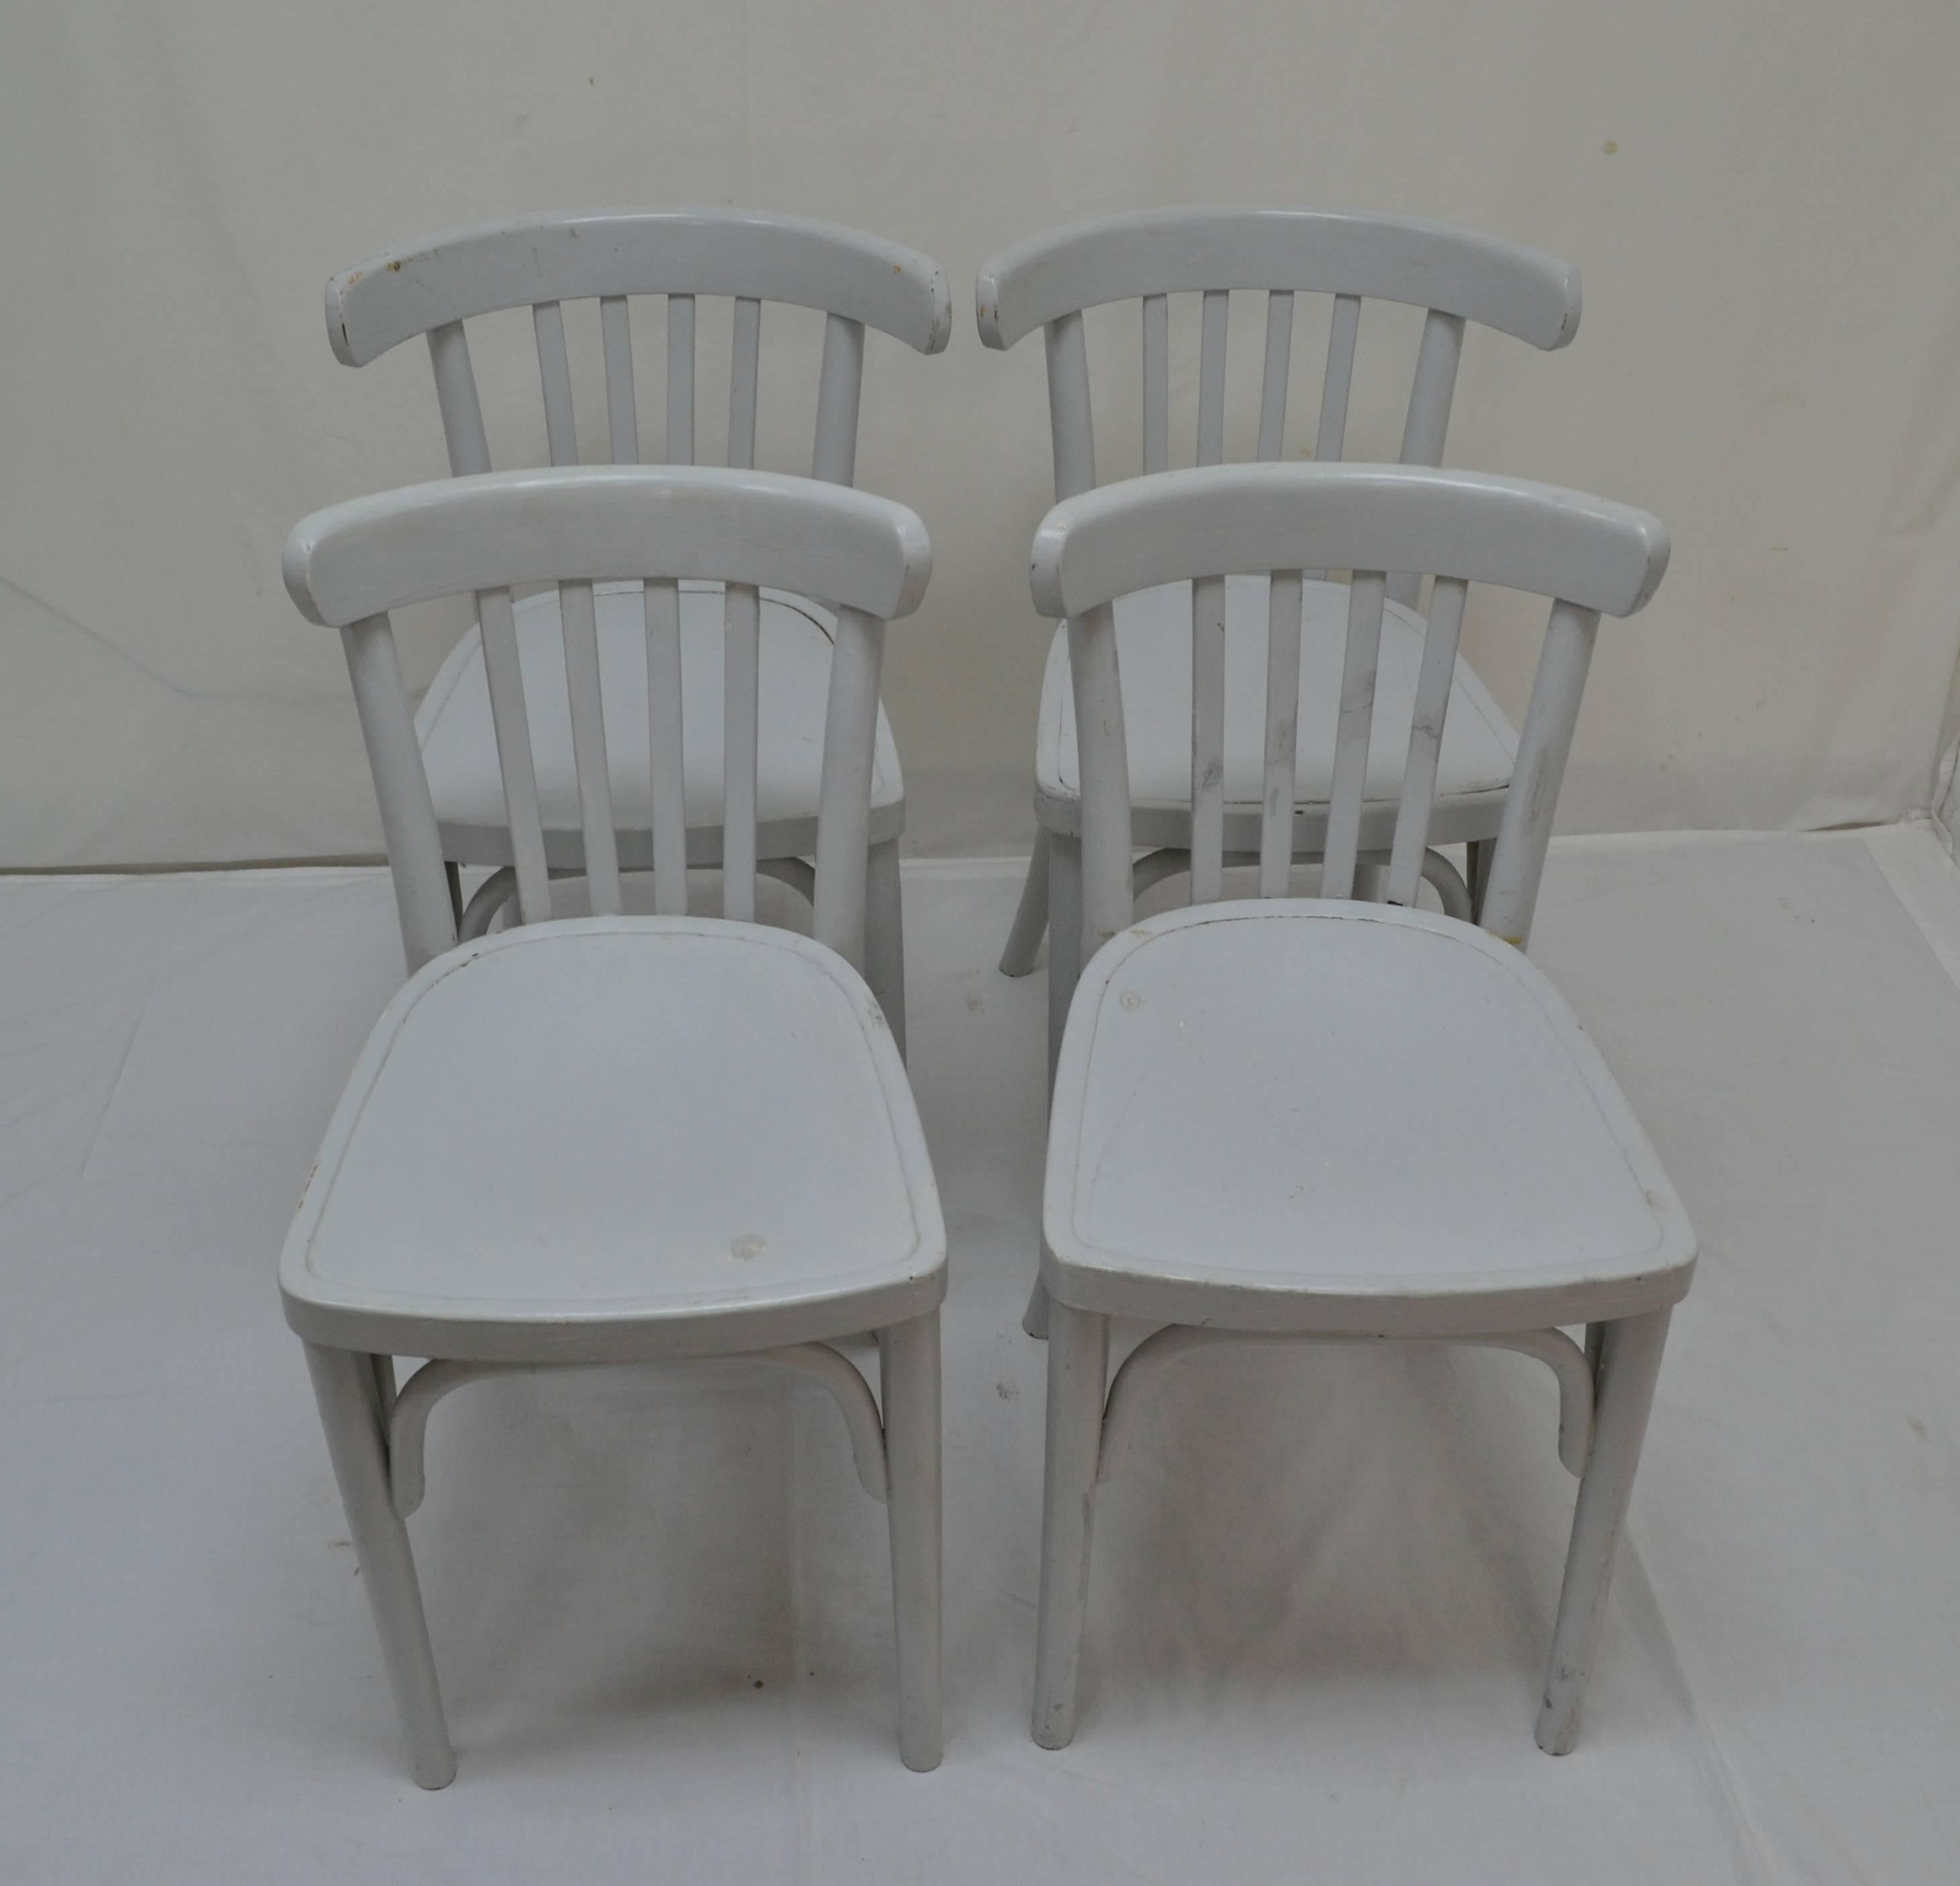 2FD95 set of four vintage bentwood chairs measure: 16 x 17 x 30.5 hung c.1950 $495.00
A nice set of four vintage bentwood chairs, two of which have a more pronounced ”wraparound” back rail. These chairs are small, attractive, sturdy, and